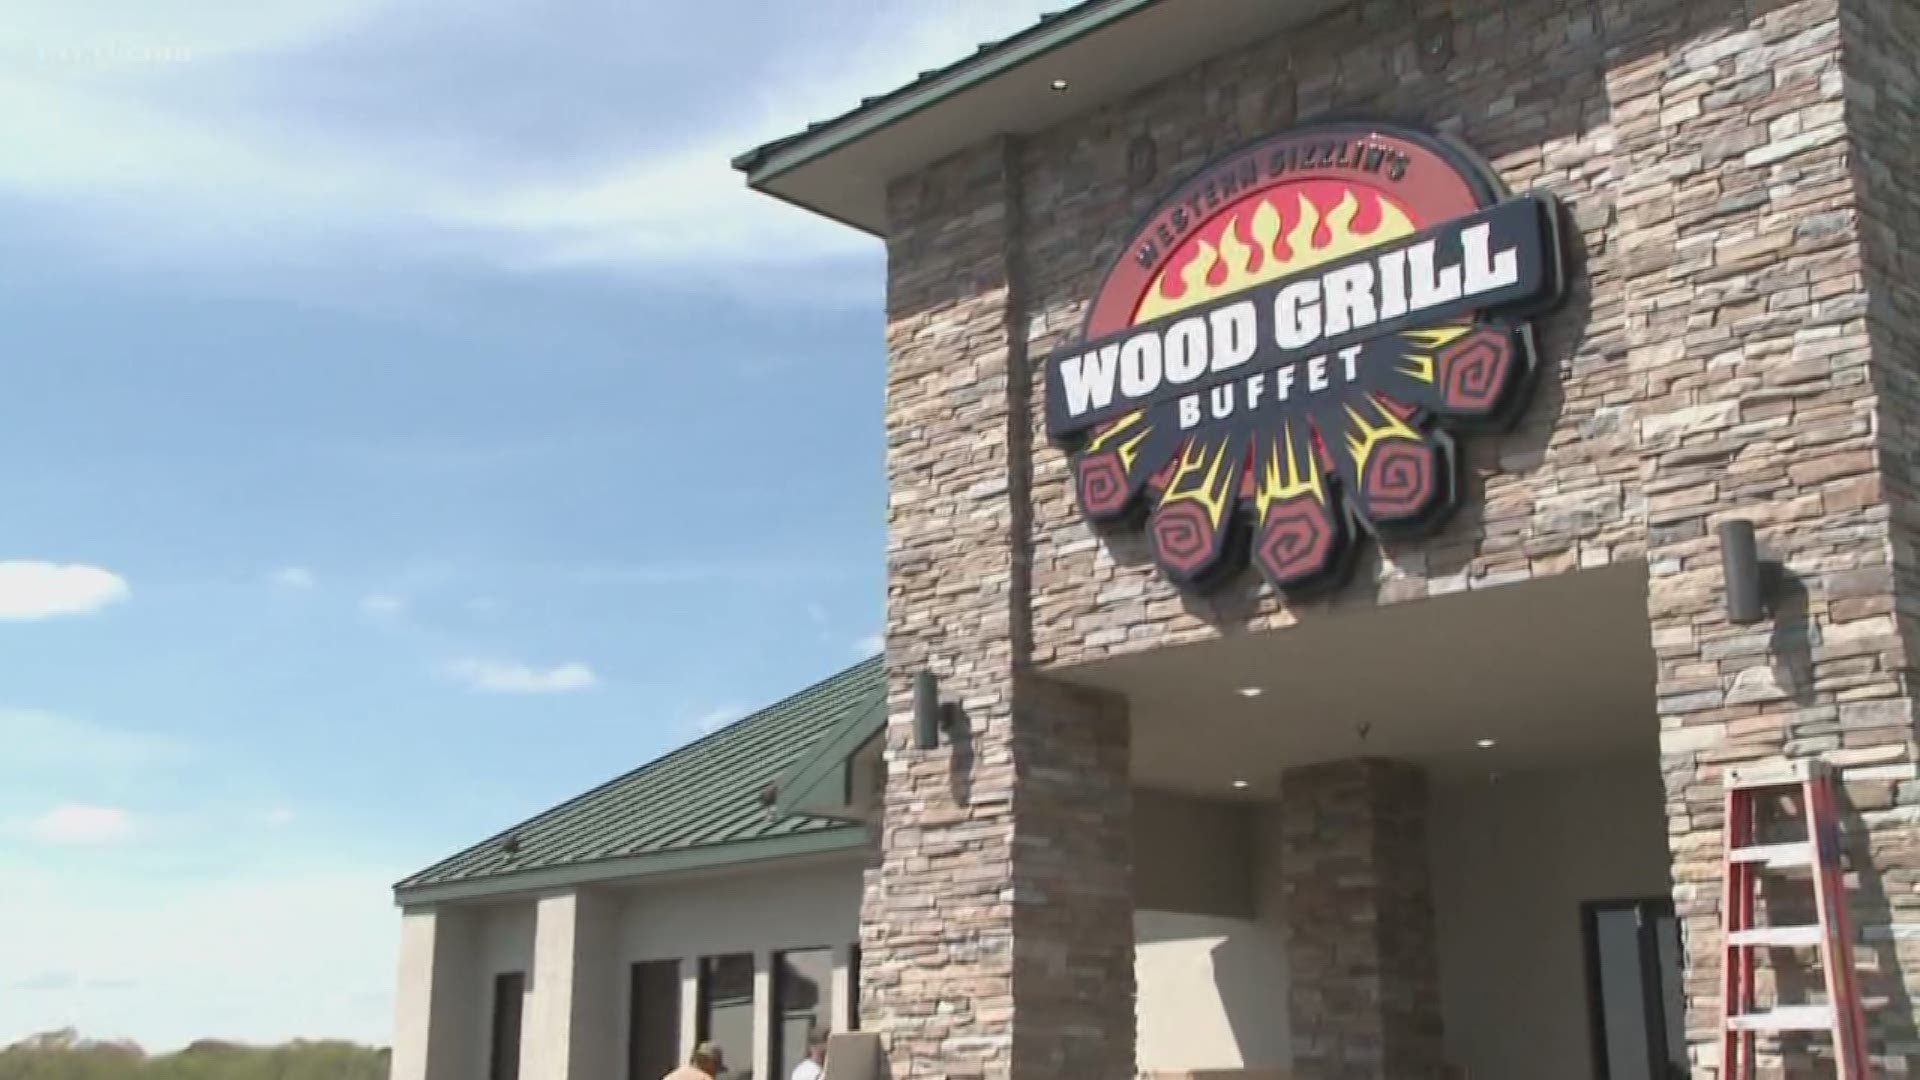 Something new is coming to Benton where the old Western Sizzlin' closed earlier this year.